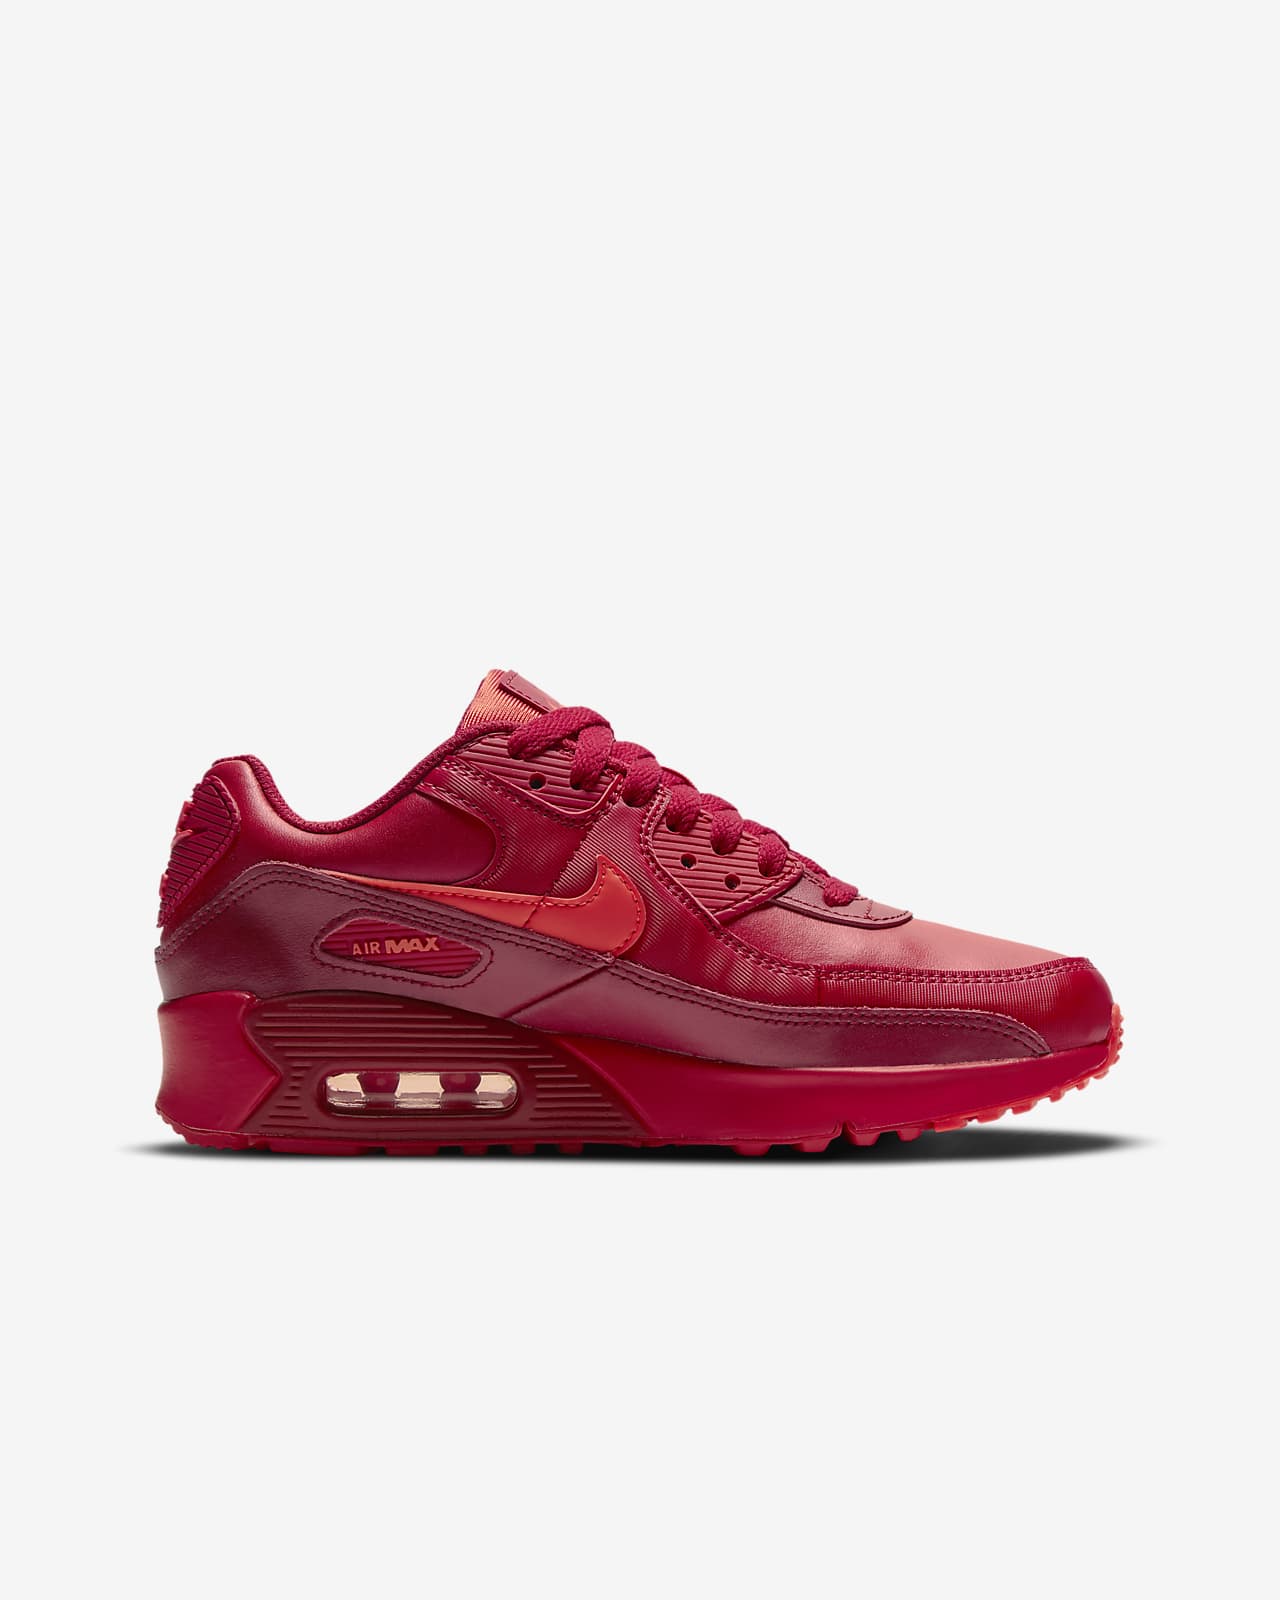 all red air max 90s